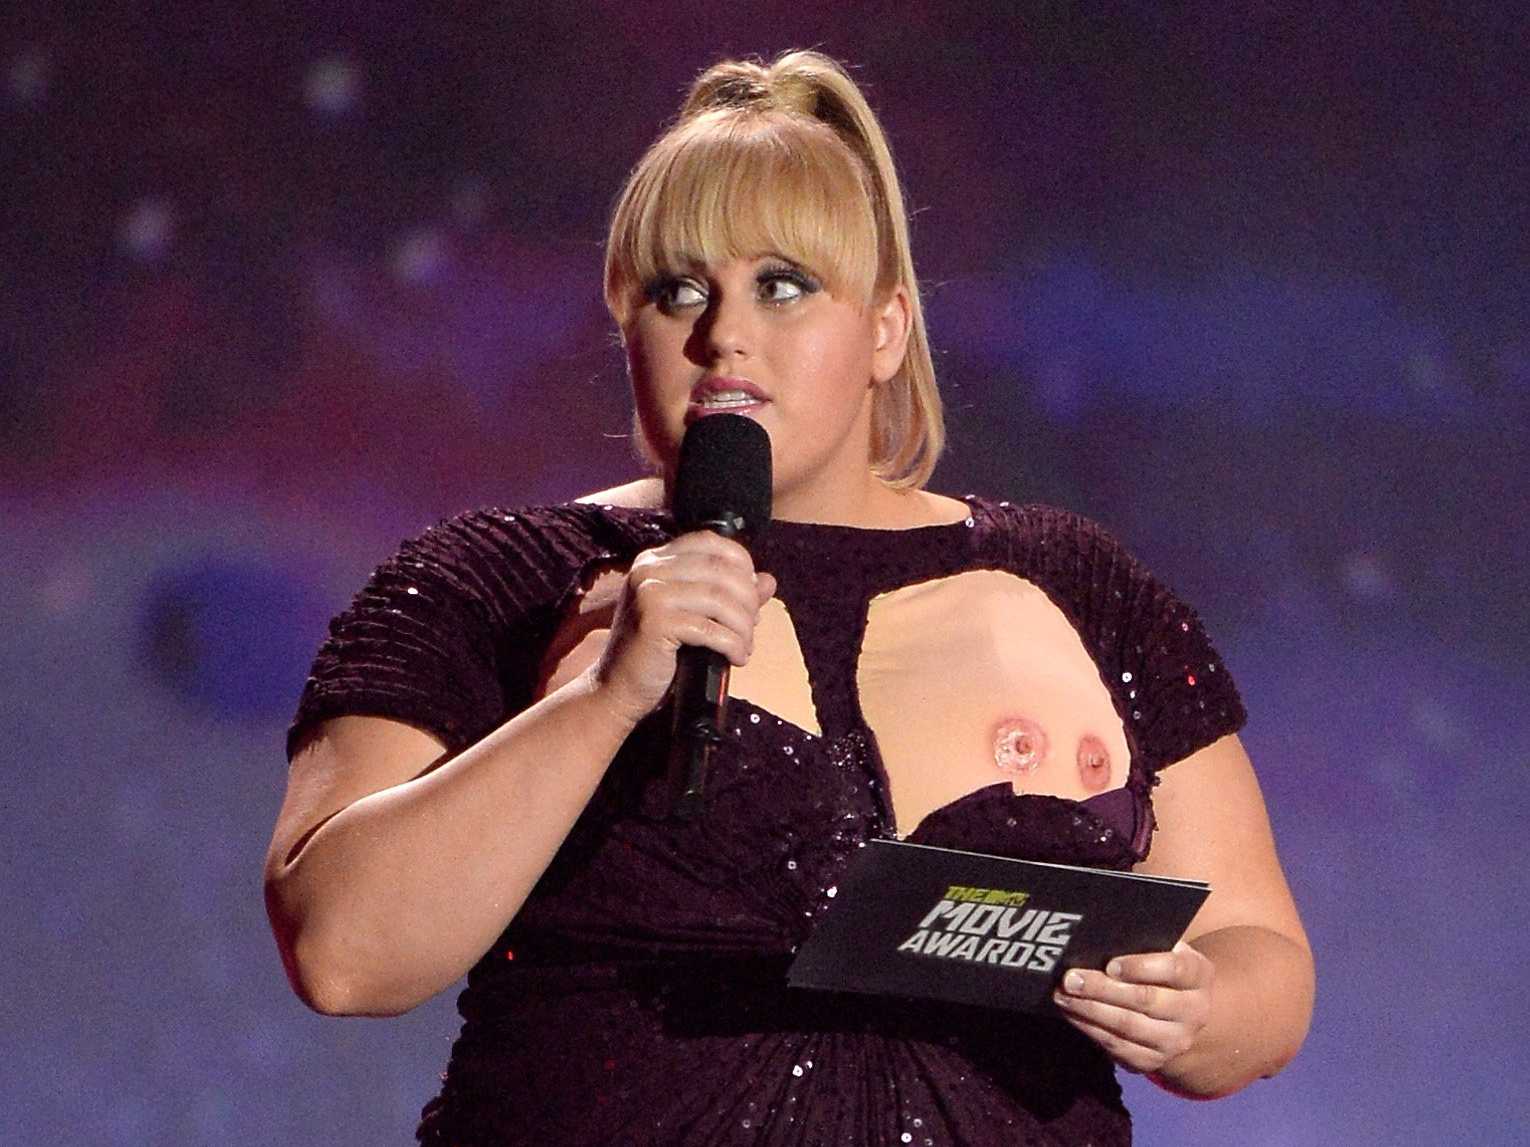 Later, while discussing body image, Rebel Wilson pulled down half her dress...